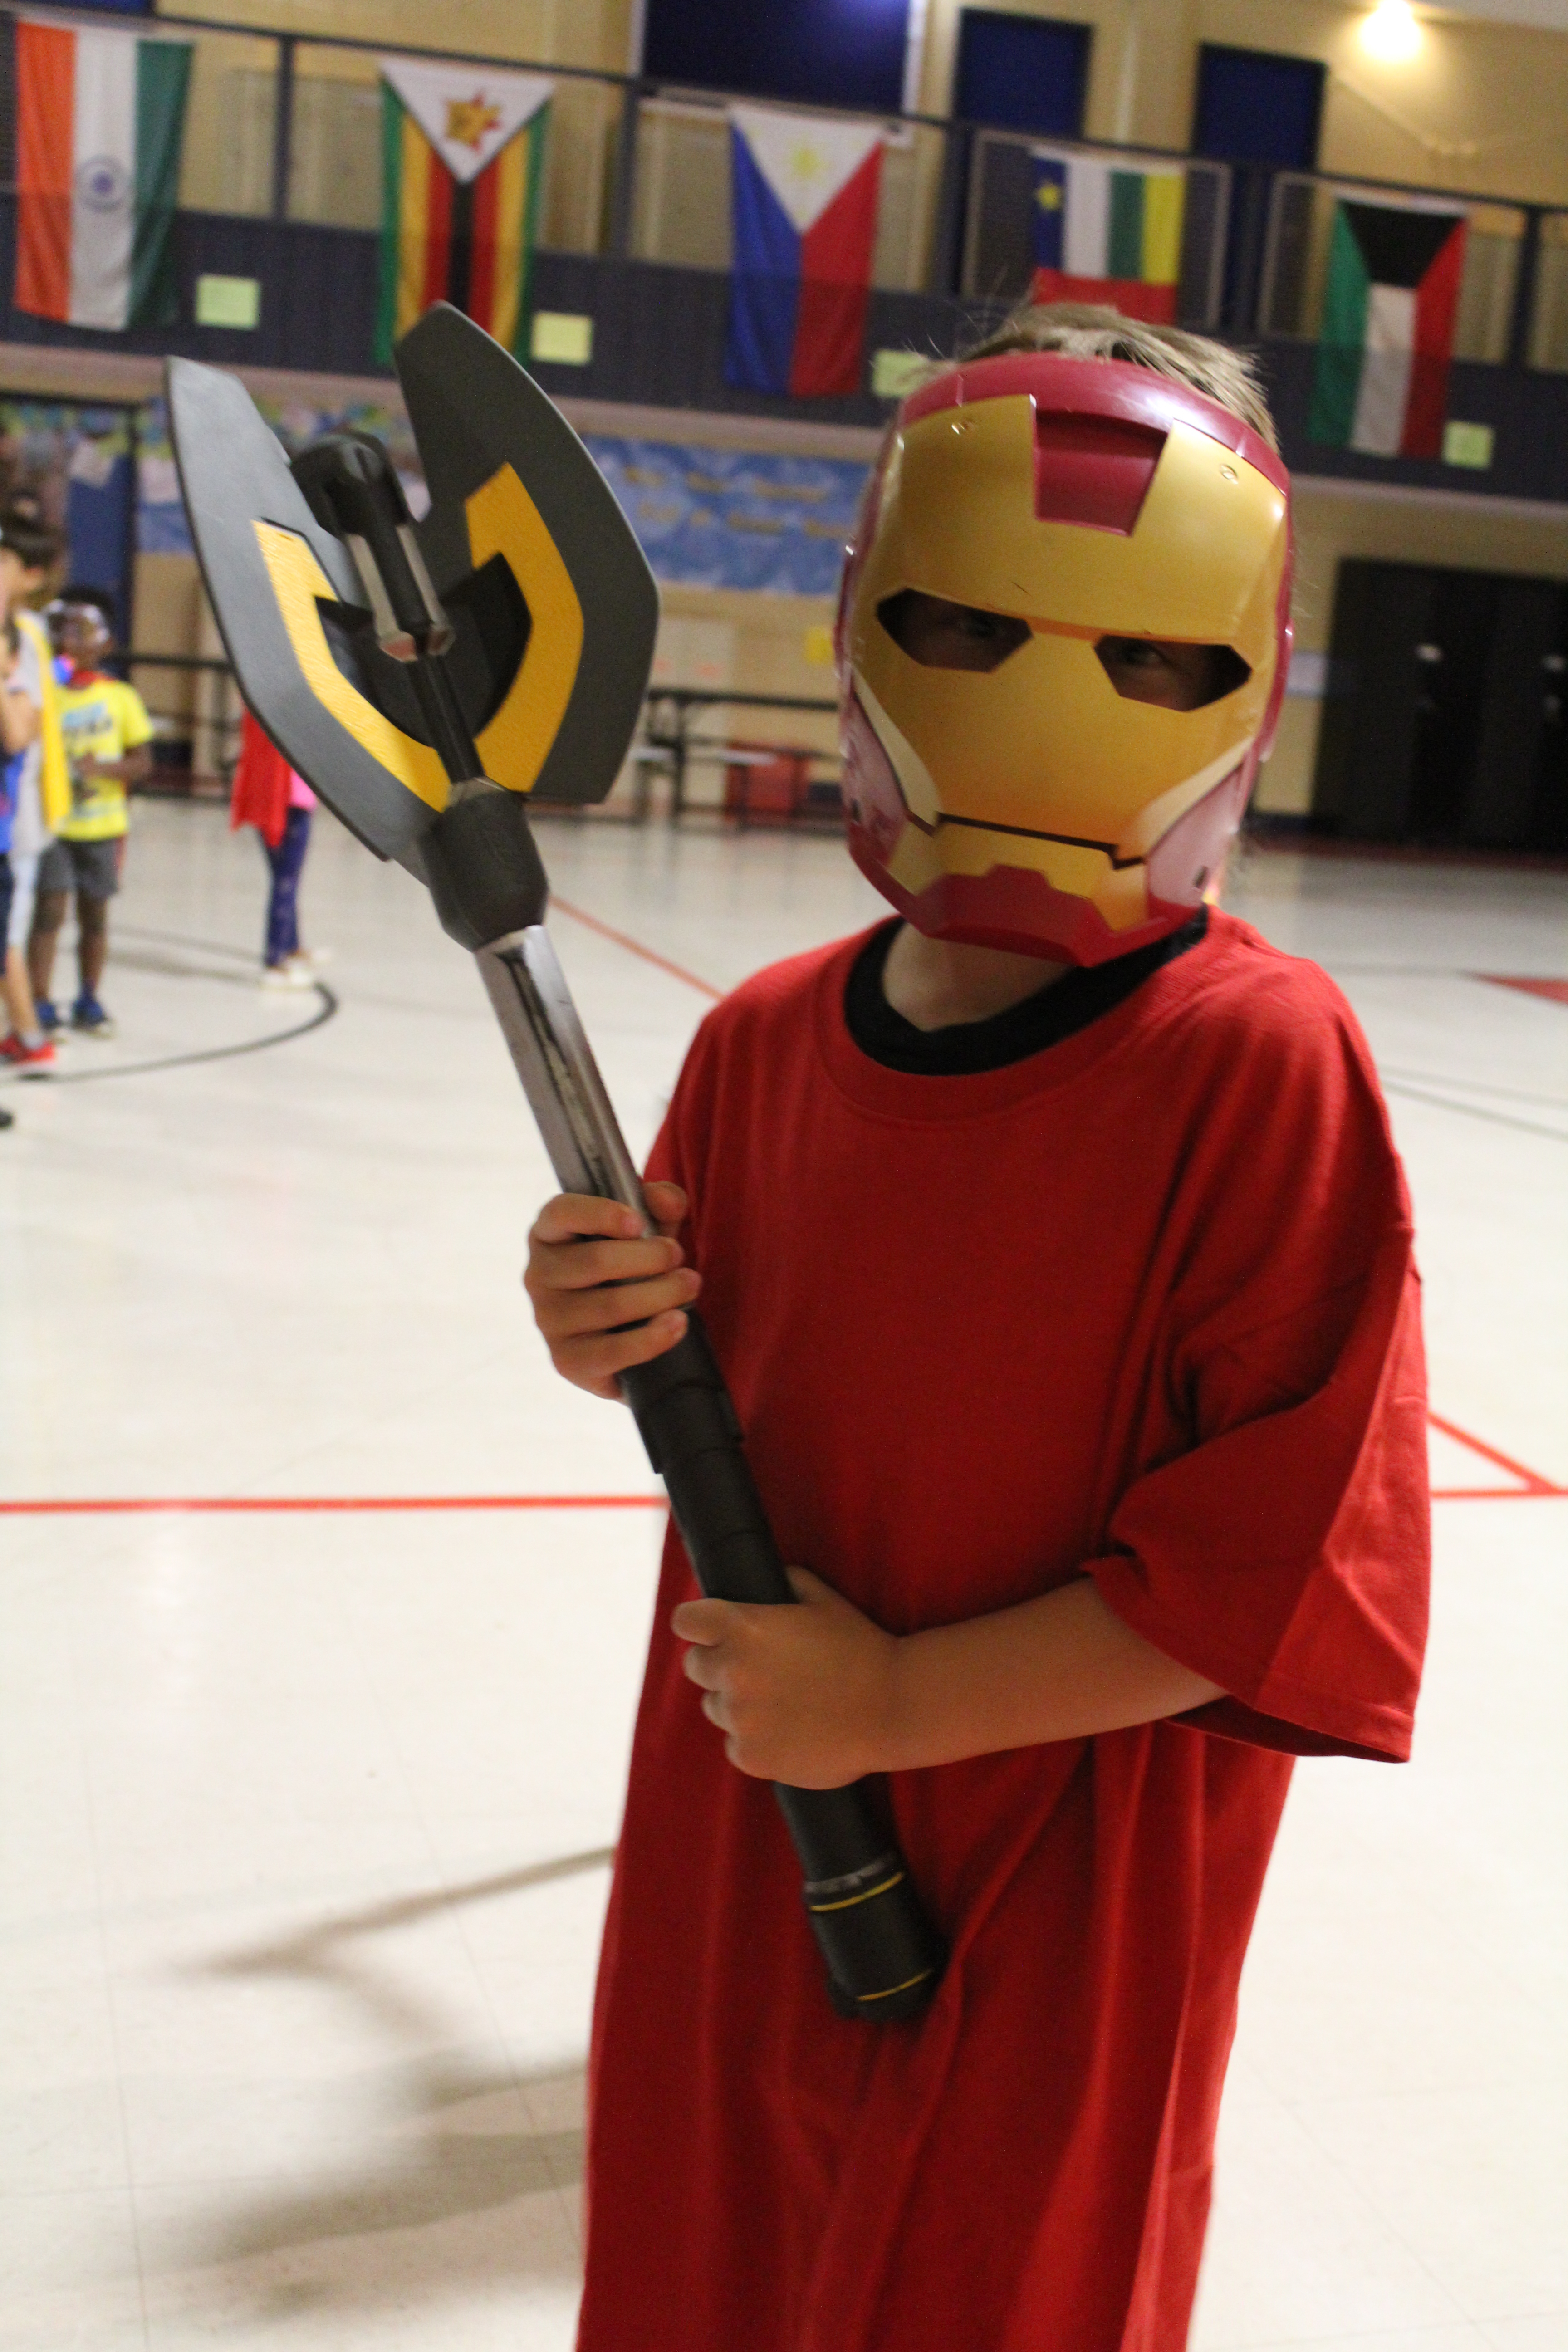 Up, Up and Away! It's Superhero Camp